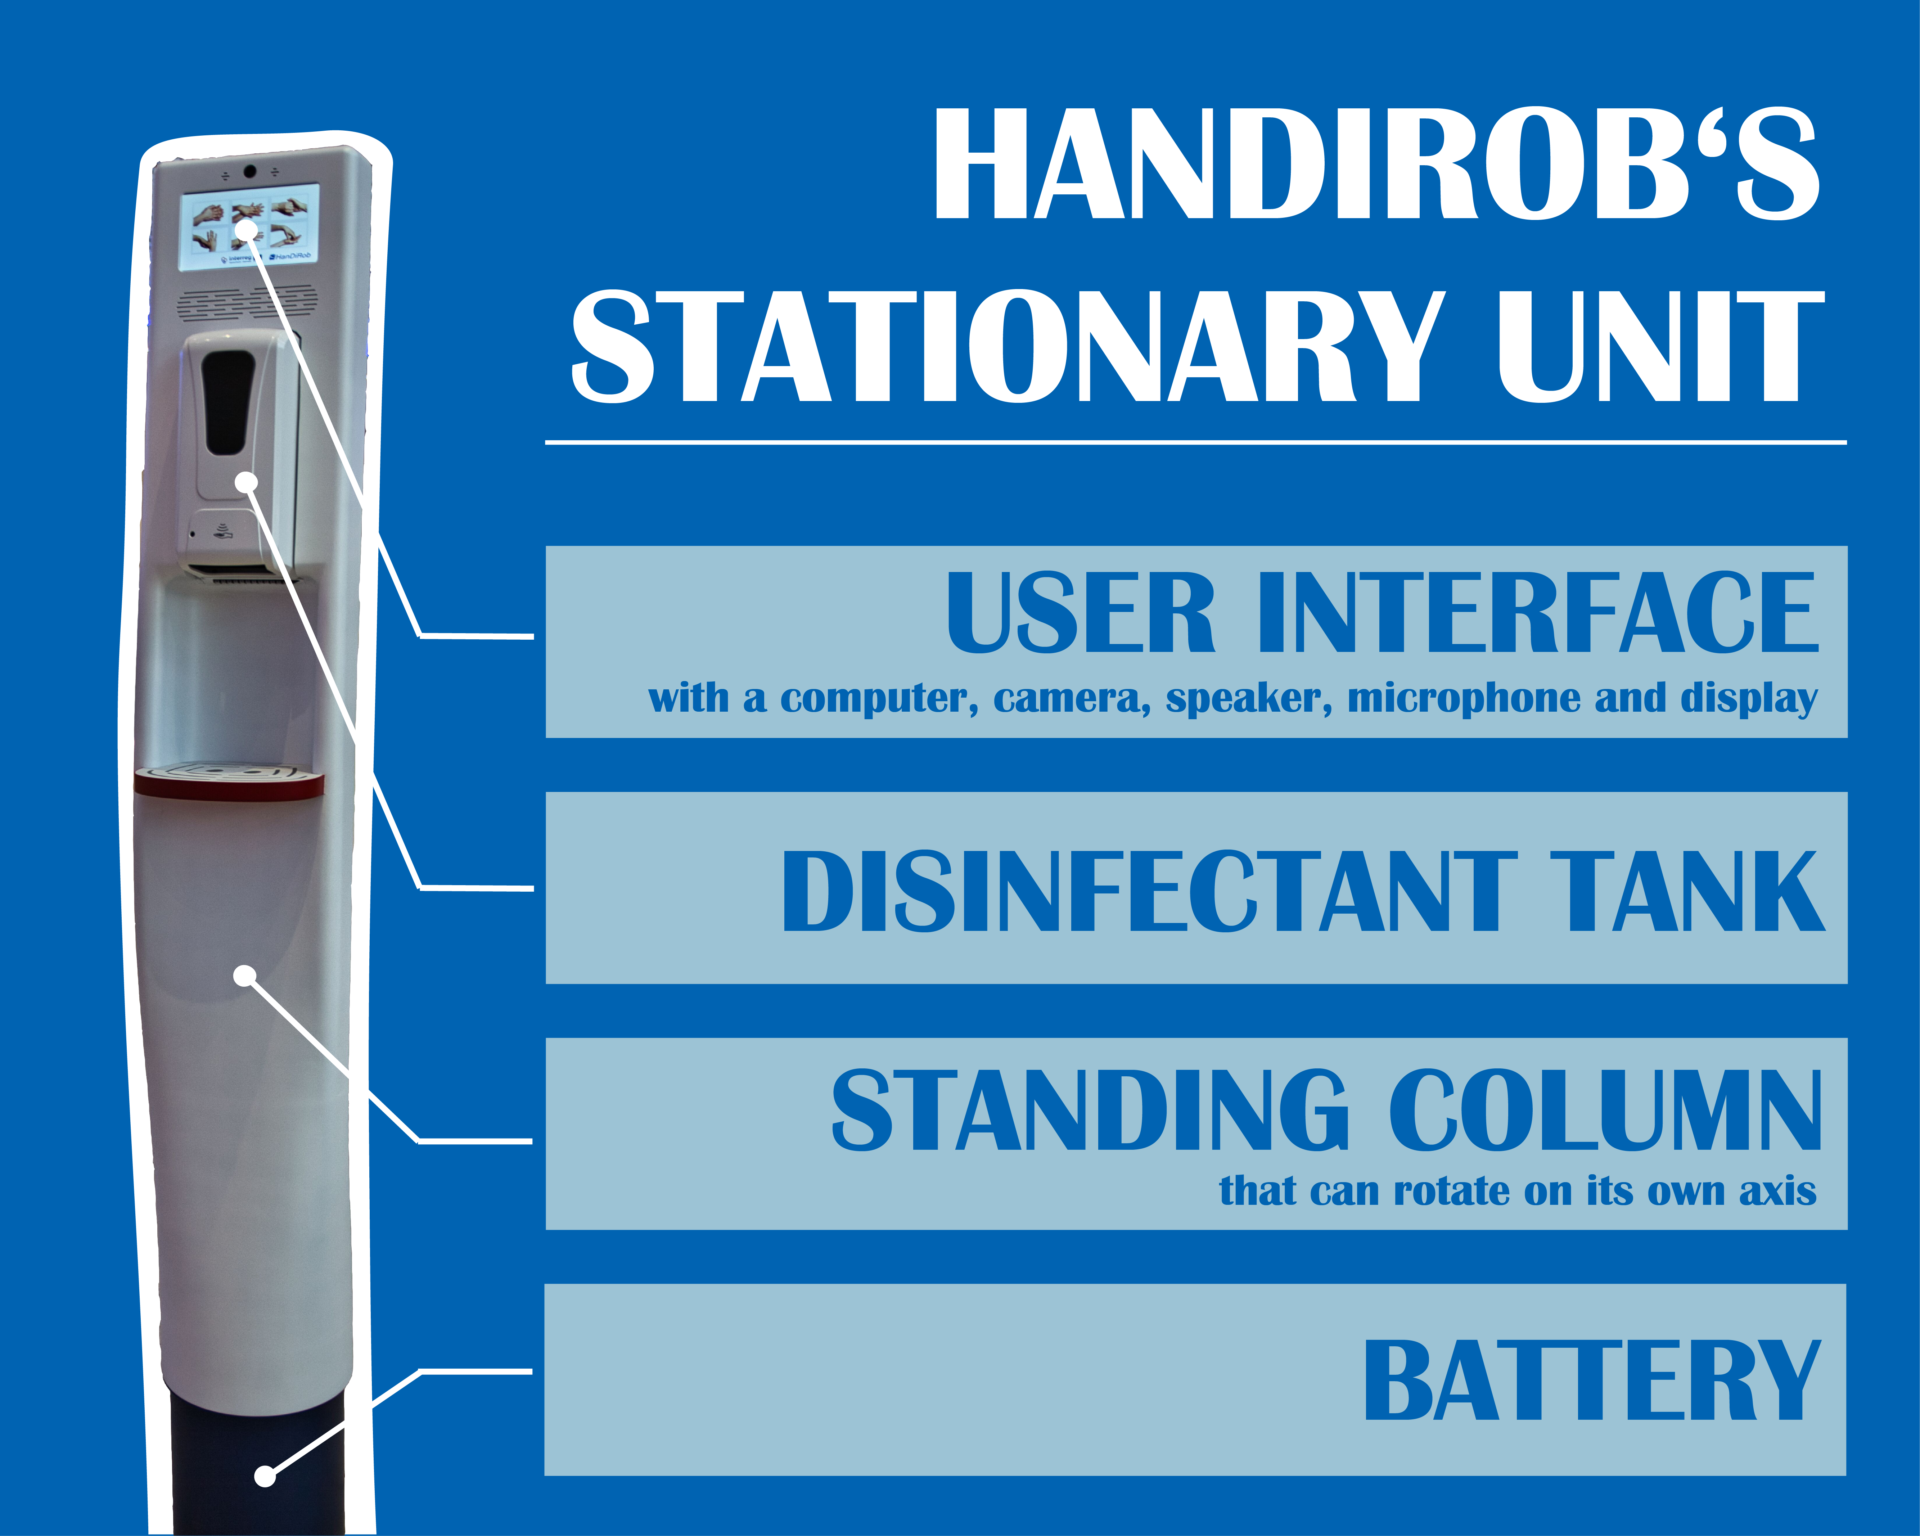 Structure of the stationary unit